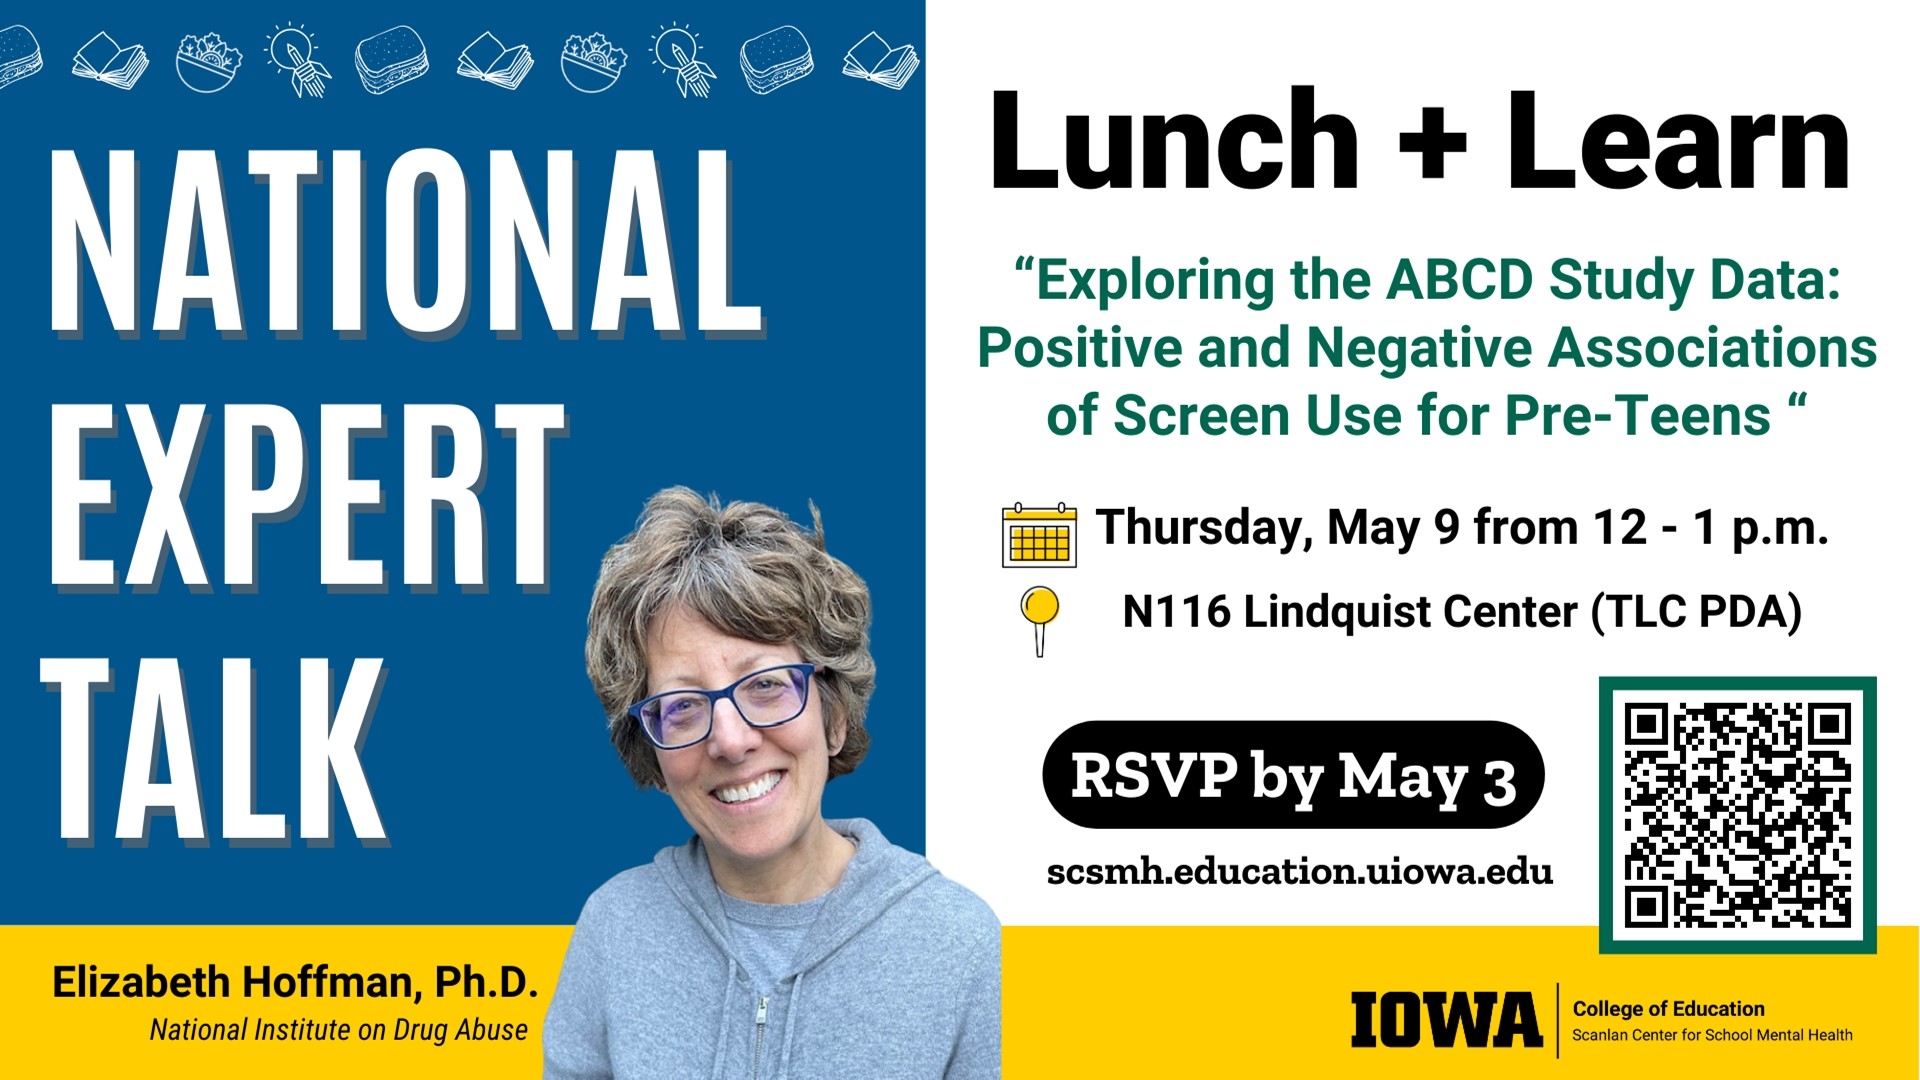 Lunch and Learn: Exploring the ABCD Study Data: Positive and Negative Associations of Screen Use for Pre-Teens. 5/9, 12-1p, N116 LC. RSVP by 5/3, scsmh.education.uiowa.edu